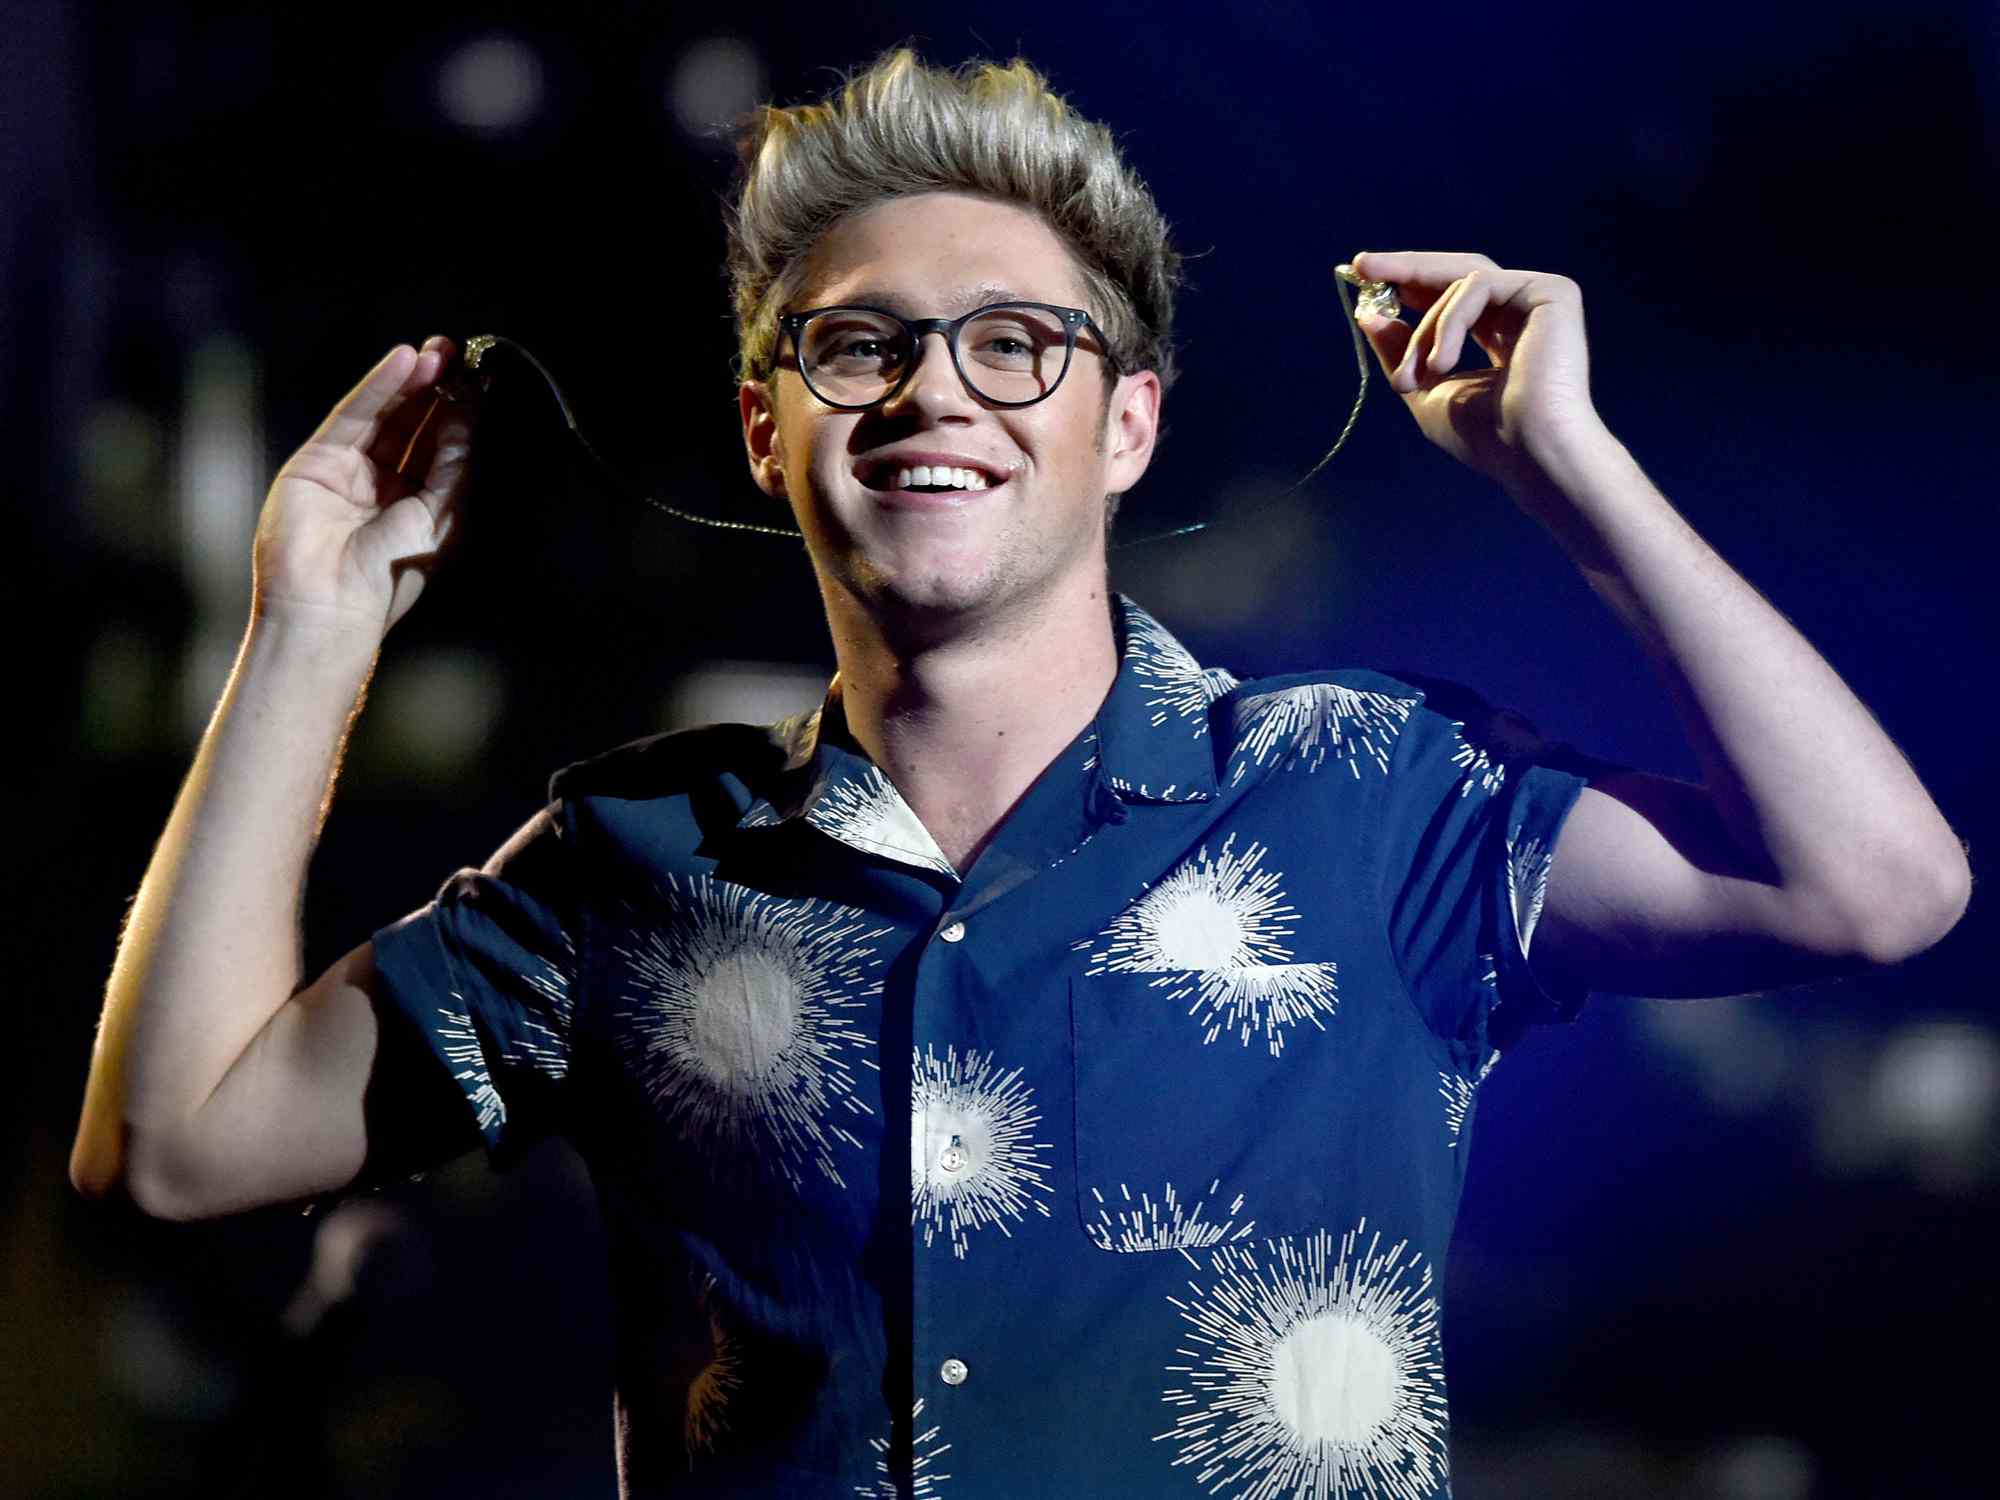 Niall Horan of One Direction performs onstage during 106.1 KISS FM's Jingle Ball 2015 presented by Capital One at American Airlines Center on December 1, 2015 in Dallas, Texas